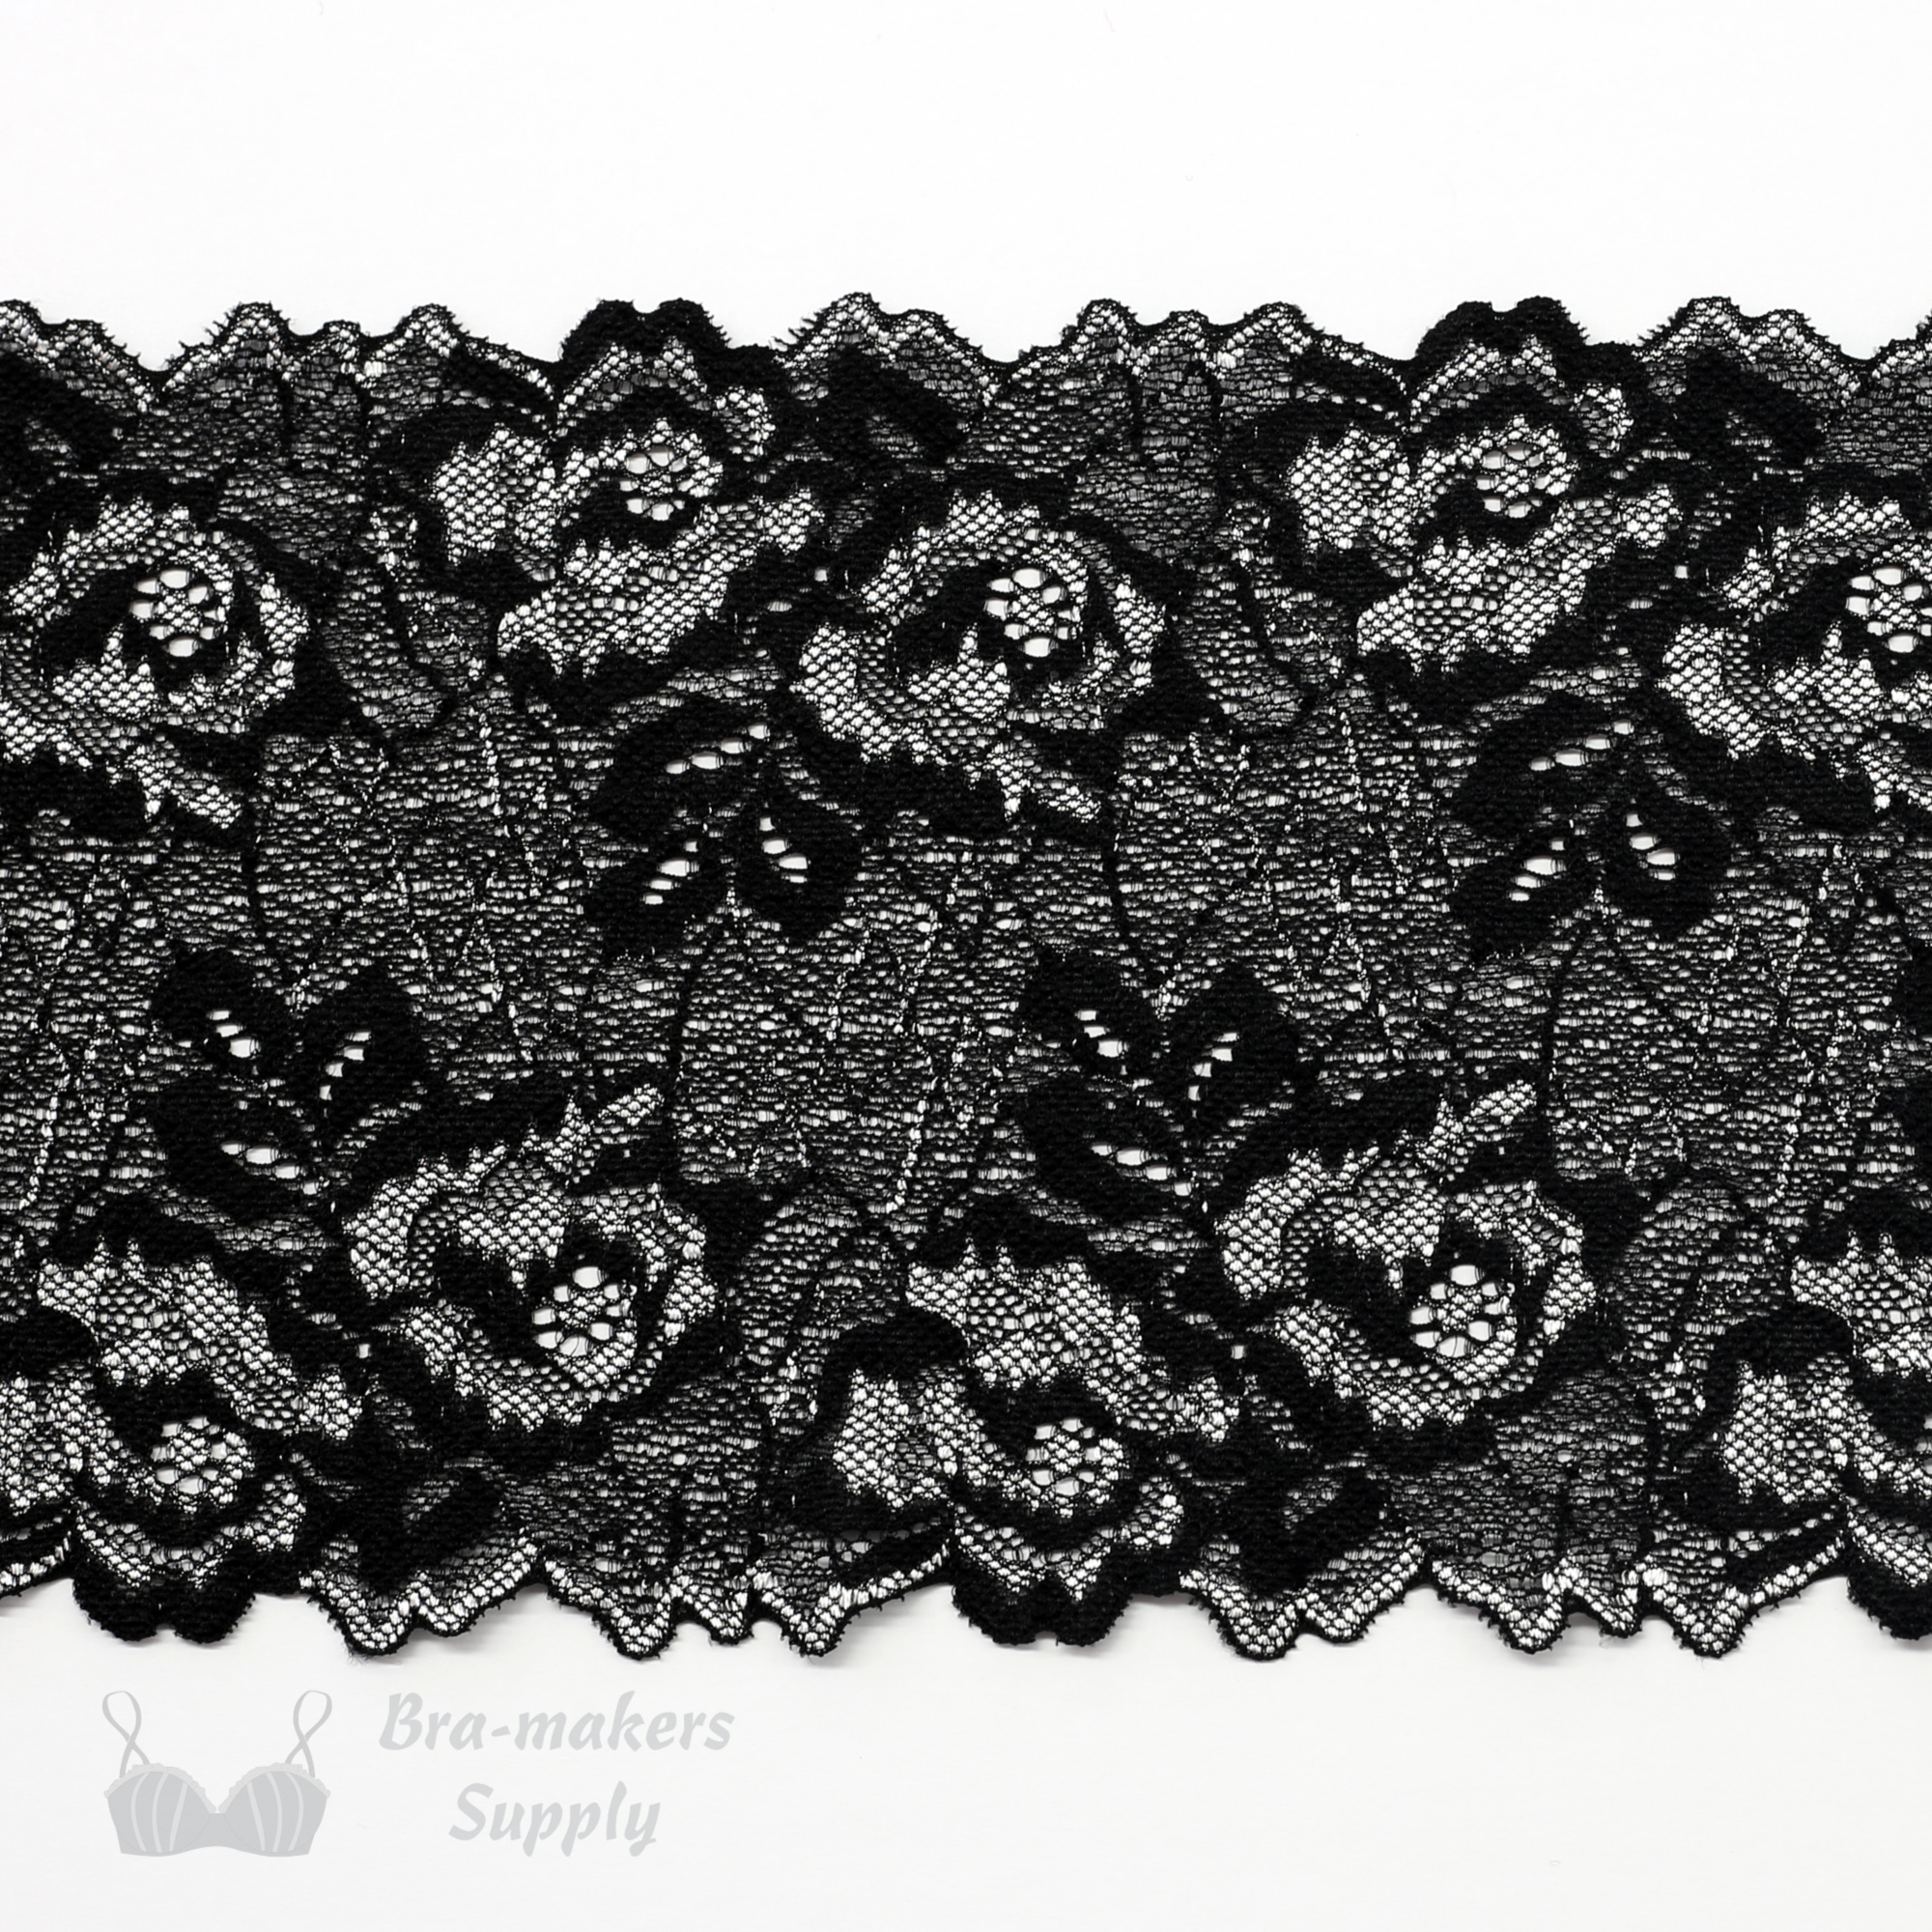 Five Inch Silver Black Border Floral Stretch Lace - Bra-Makers Supply